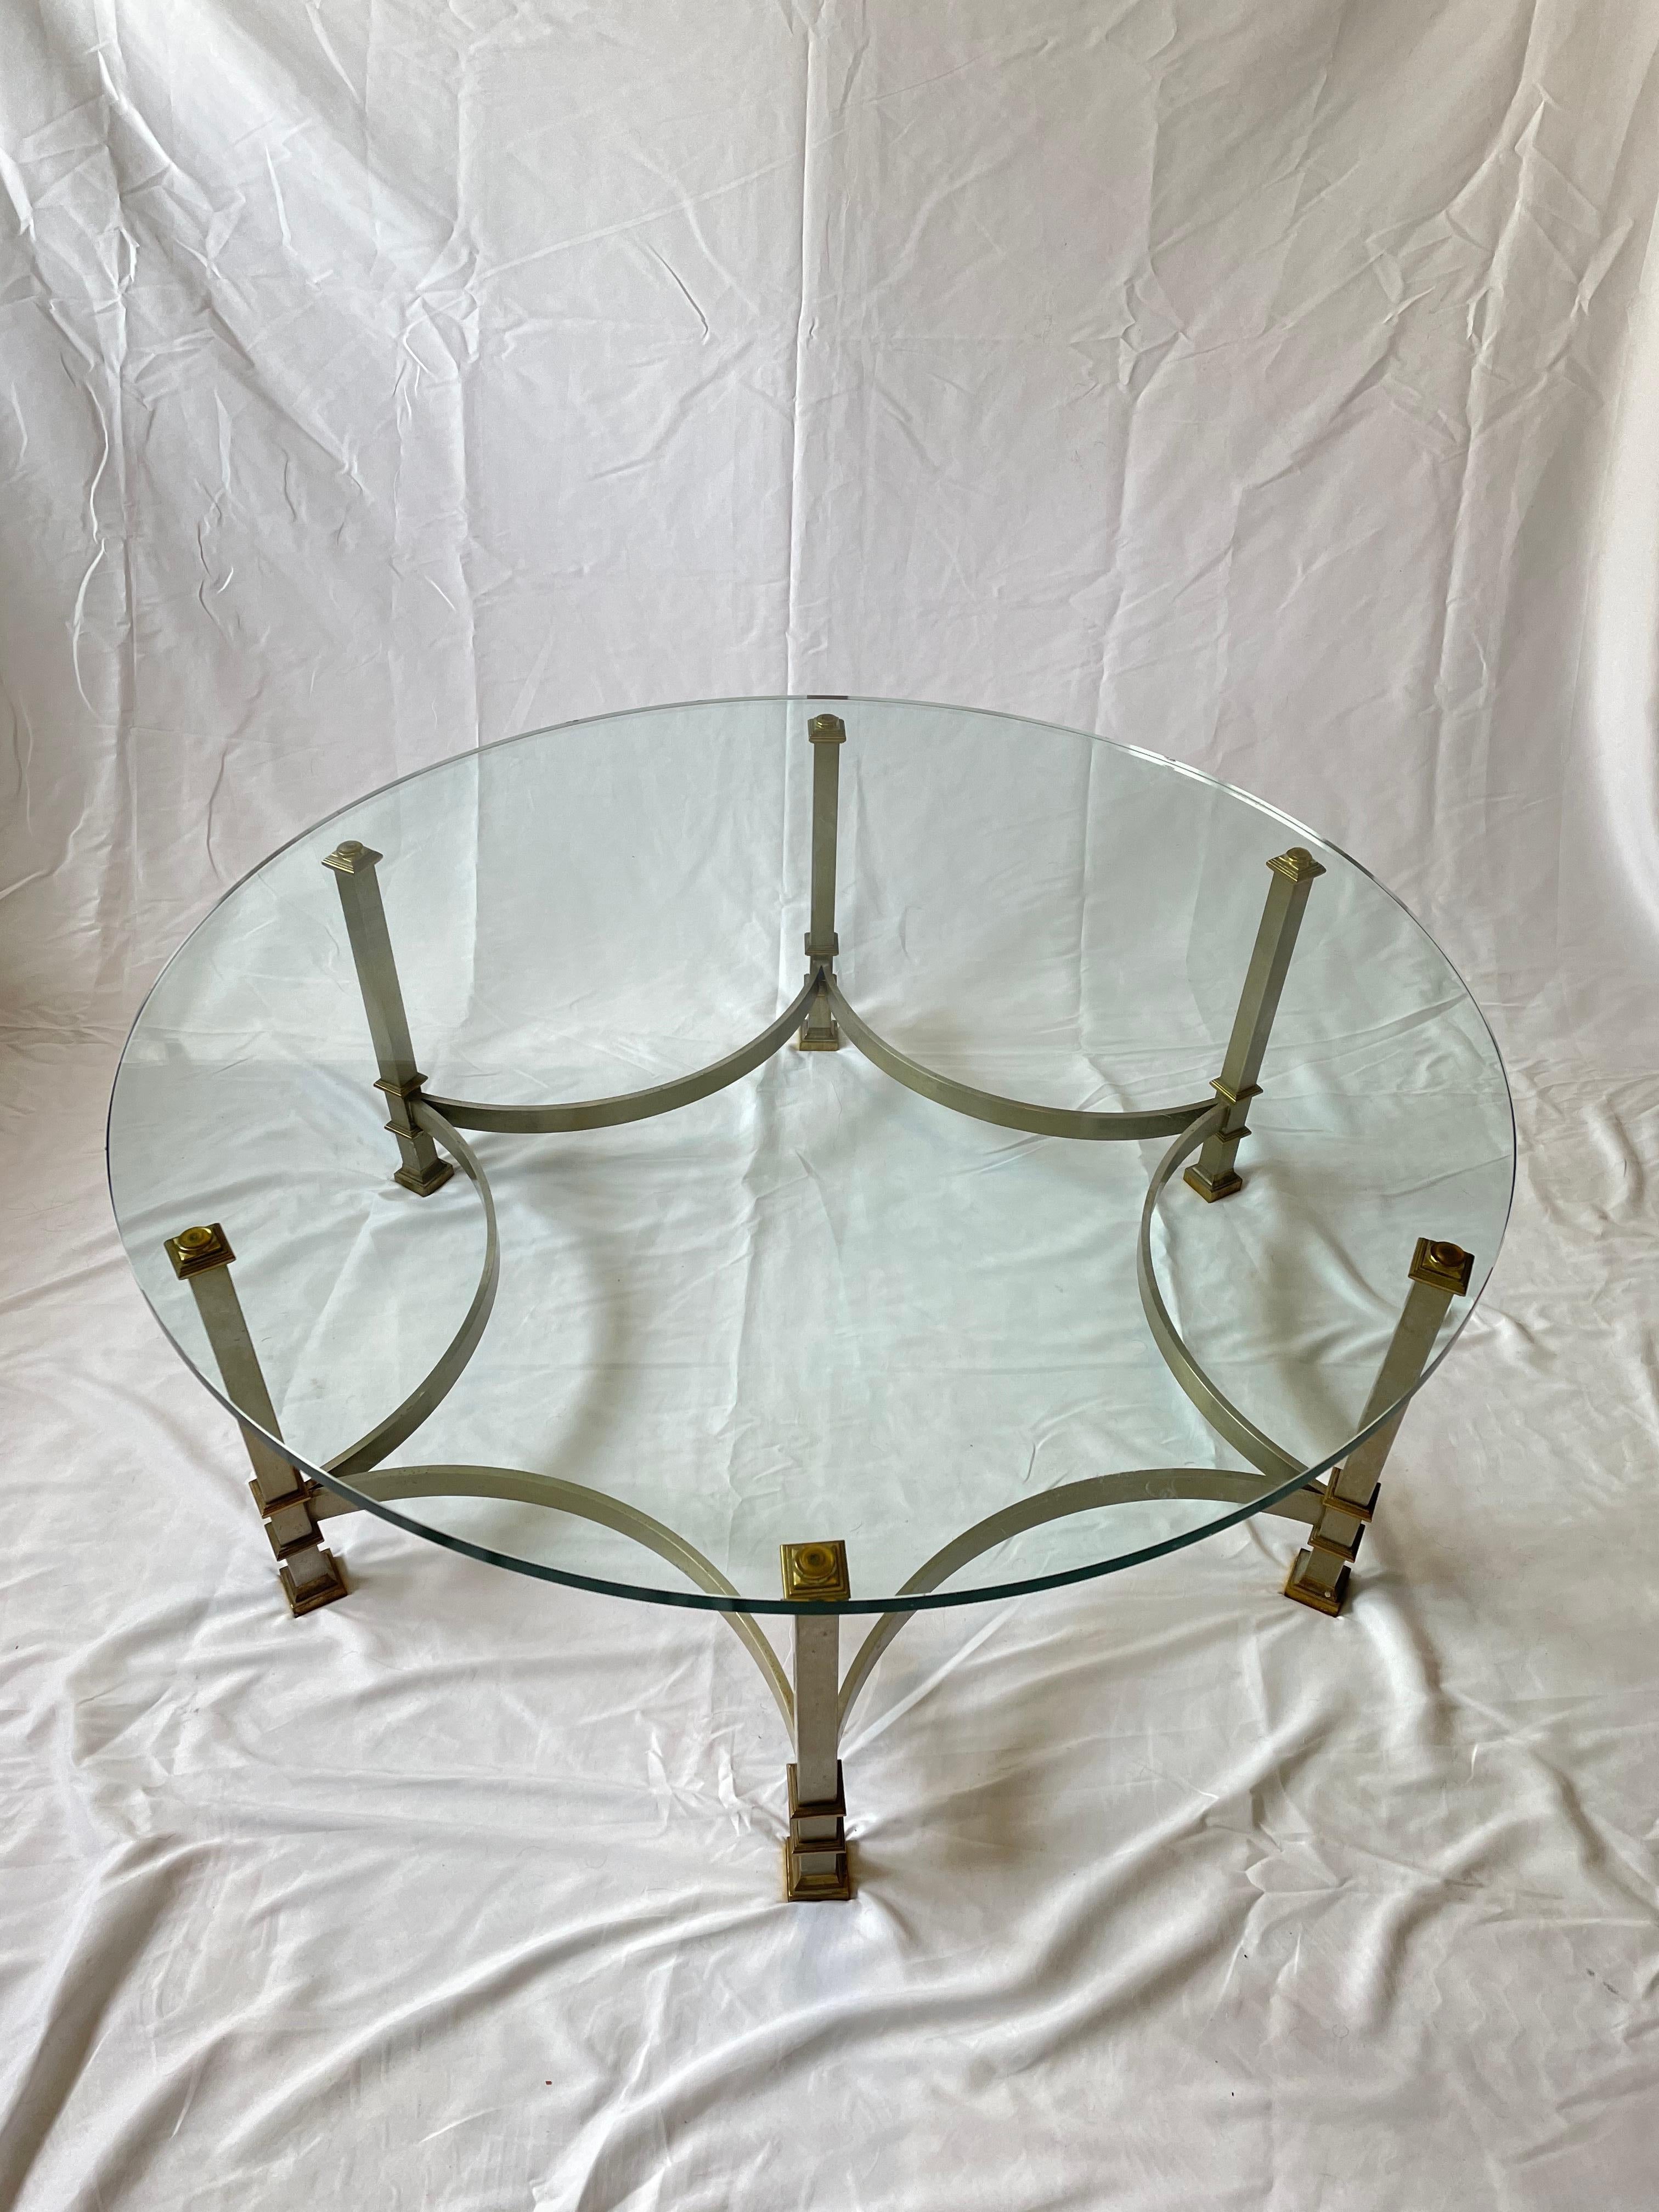 A rare neoclassical style coffee table attributed to Maison Jansen. Square steel legs with brass neoclassic banding and glass top. Circa 1960's.
Curbside to NYC/Philly $300